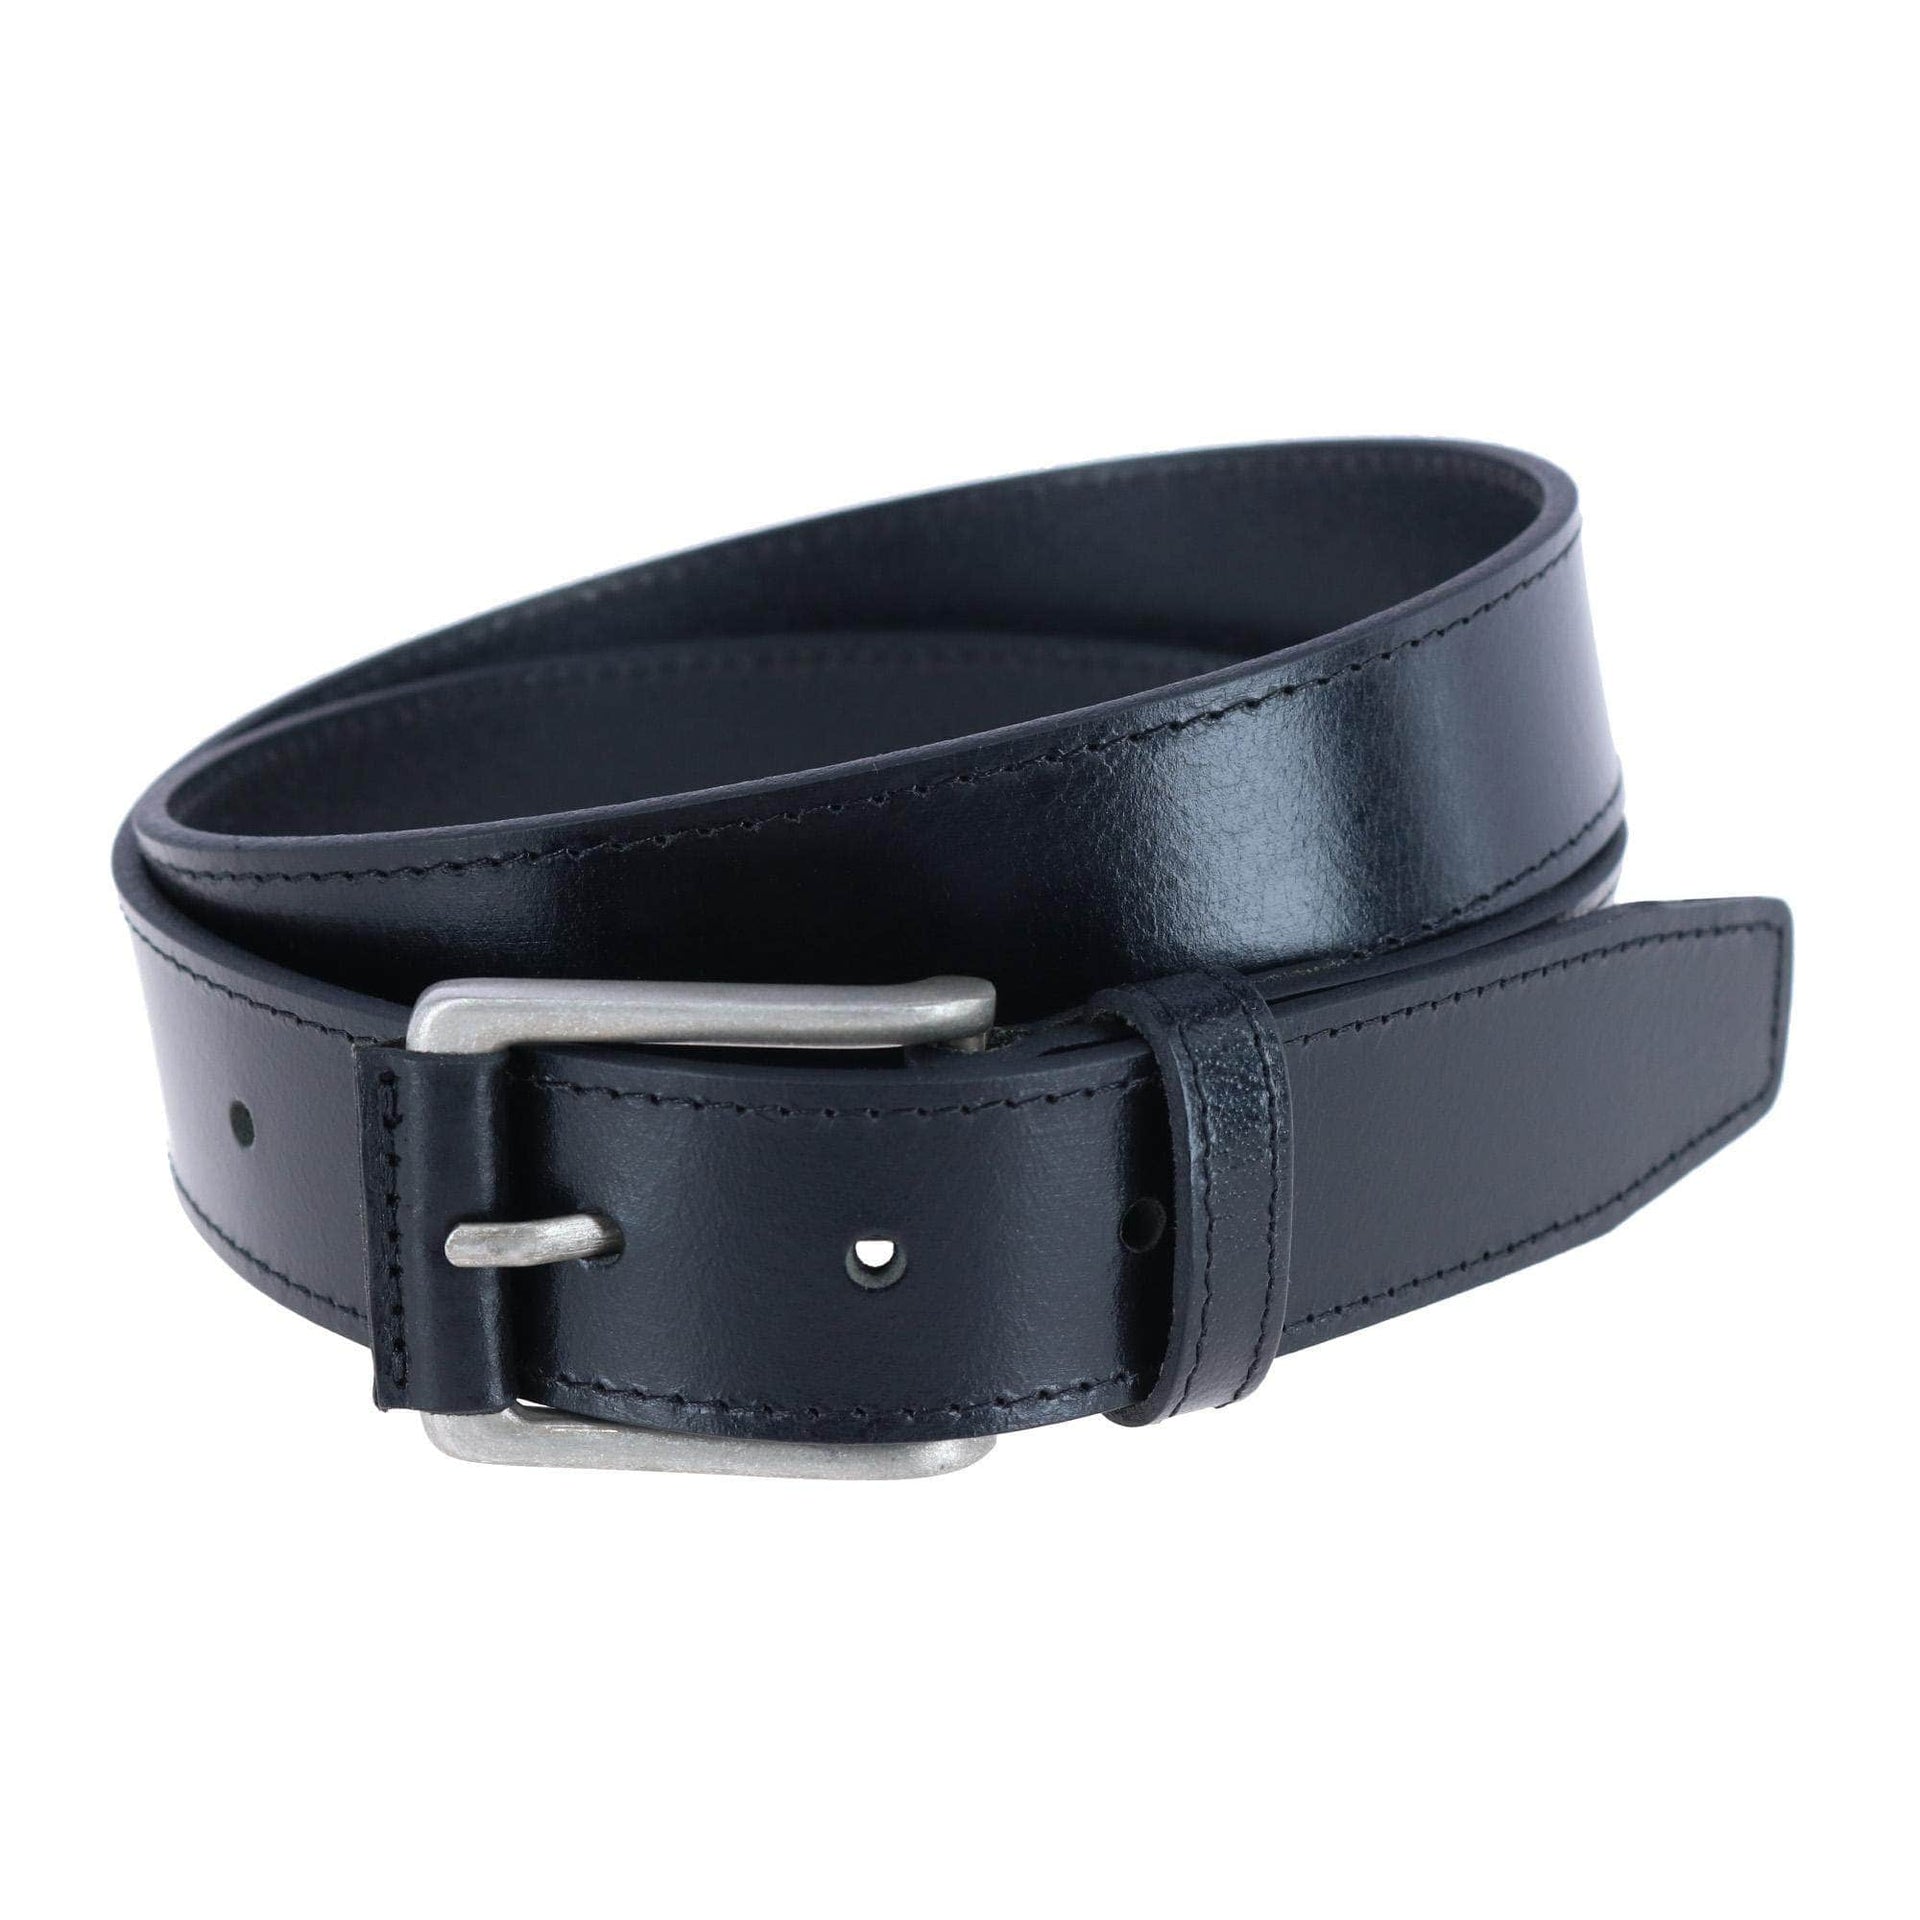 Buy Women's Belts for jeans, Genuine Leather